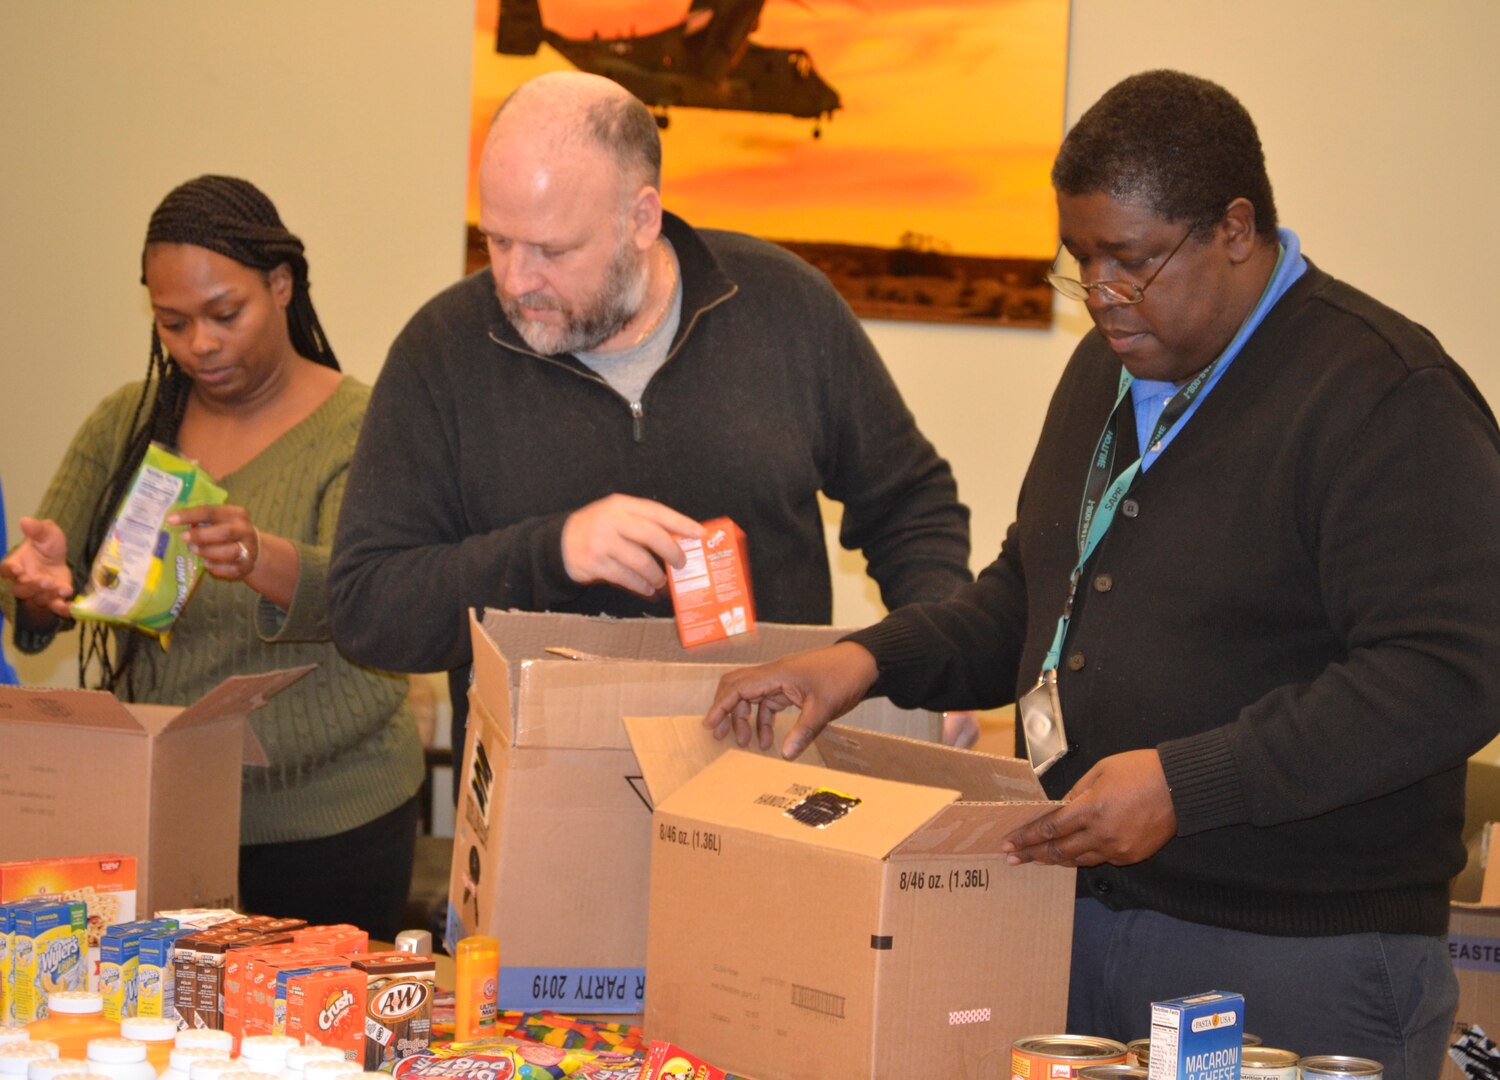 DLA Troop Support Industrial Hardware employees and “IH Troopers” Temecca Baen, Terry Piper and Ron Griffith, left to right, place items in a “Trooper Treat Box” care package March 6, 2019 in Philadelphia.